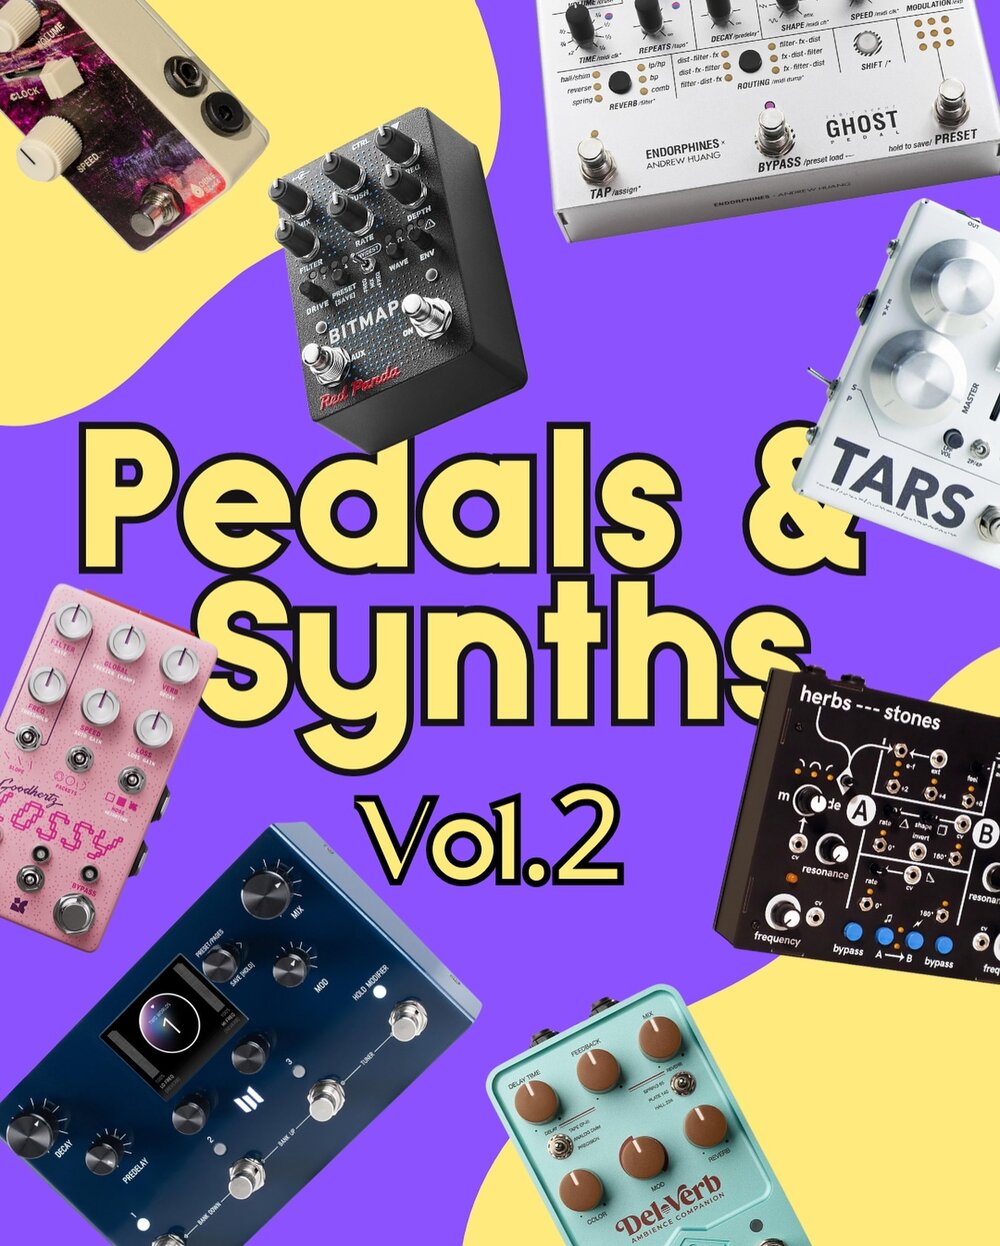 🎛️ Our Pedals for Synths Vol.2 is out now! - LINK IN BIO 🔗
Again, we gathered our favorite pedals that pair perfectly with your synthesizers! Reverbs, Delays, Filters, and more to check out 🤍⚡️🤘
&bull;
&bull;
&bull;
#pedals #pedal #effects #effec